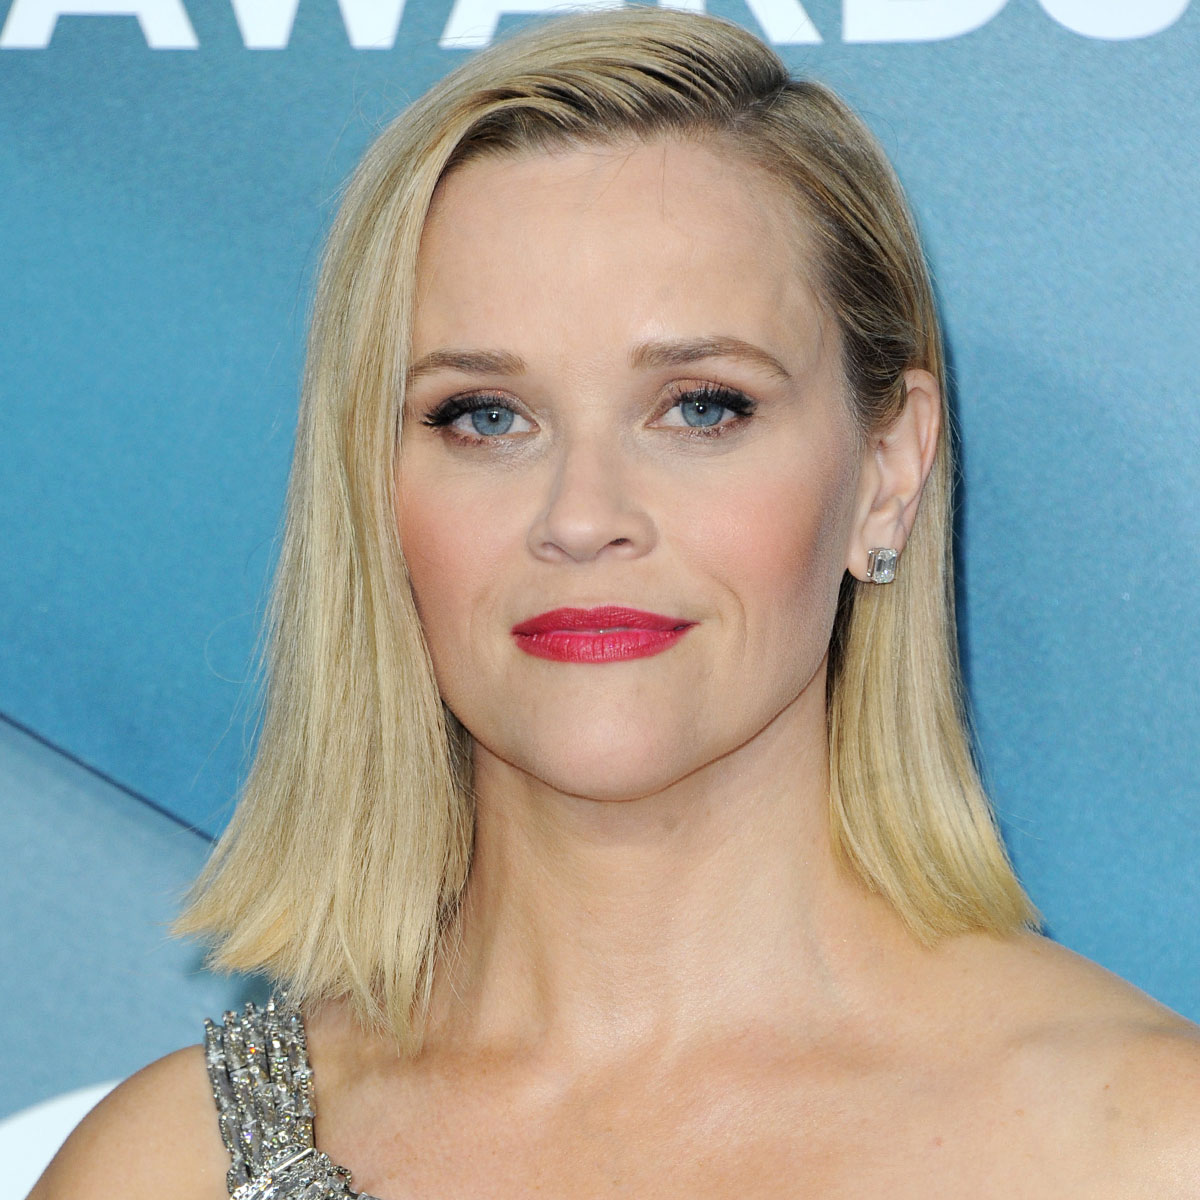 Reese Witherspoon shows off her toned legs in orange shorts after